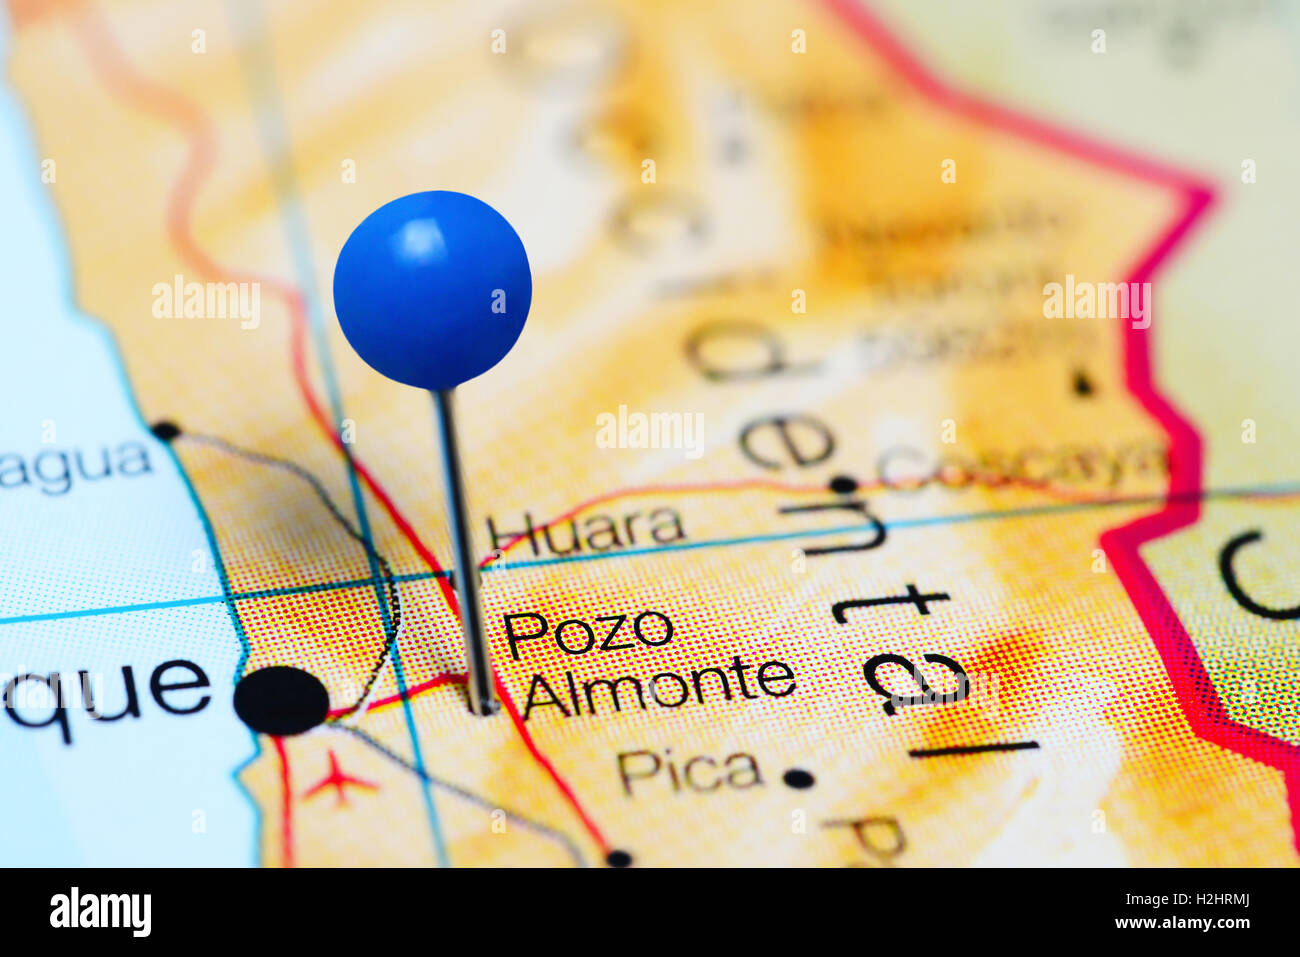 Pozo Almonte pinned on a map of Chile Stock Photo